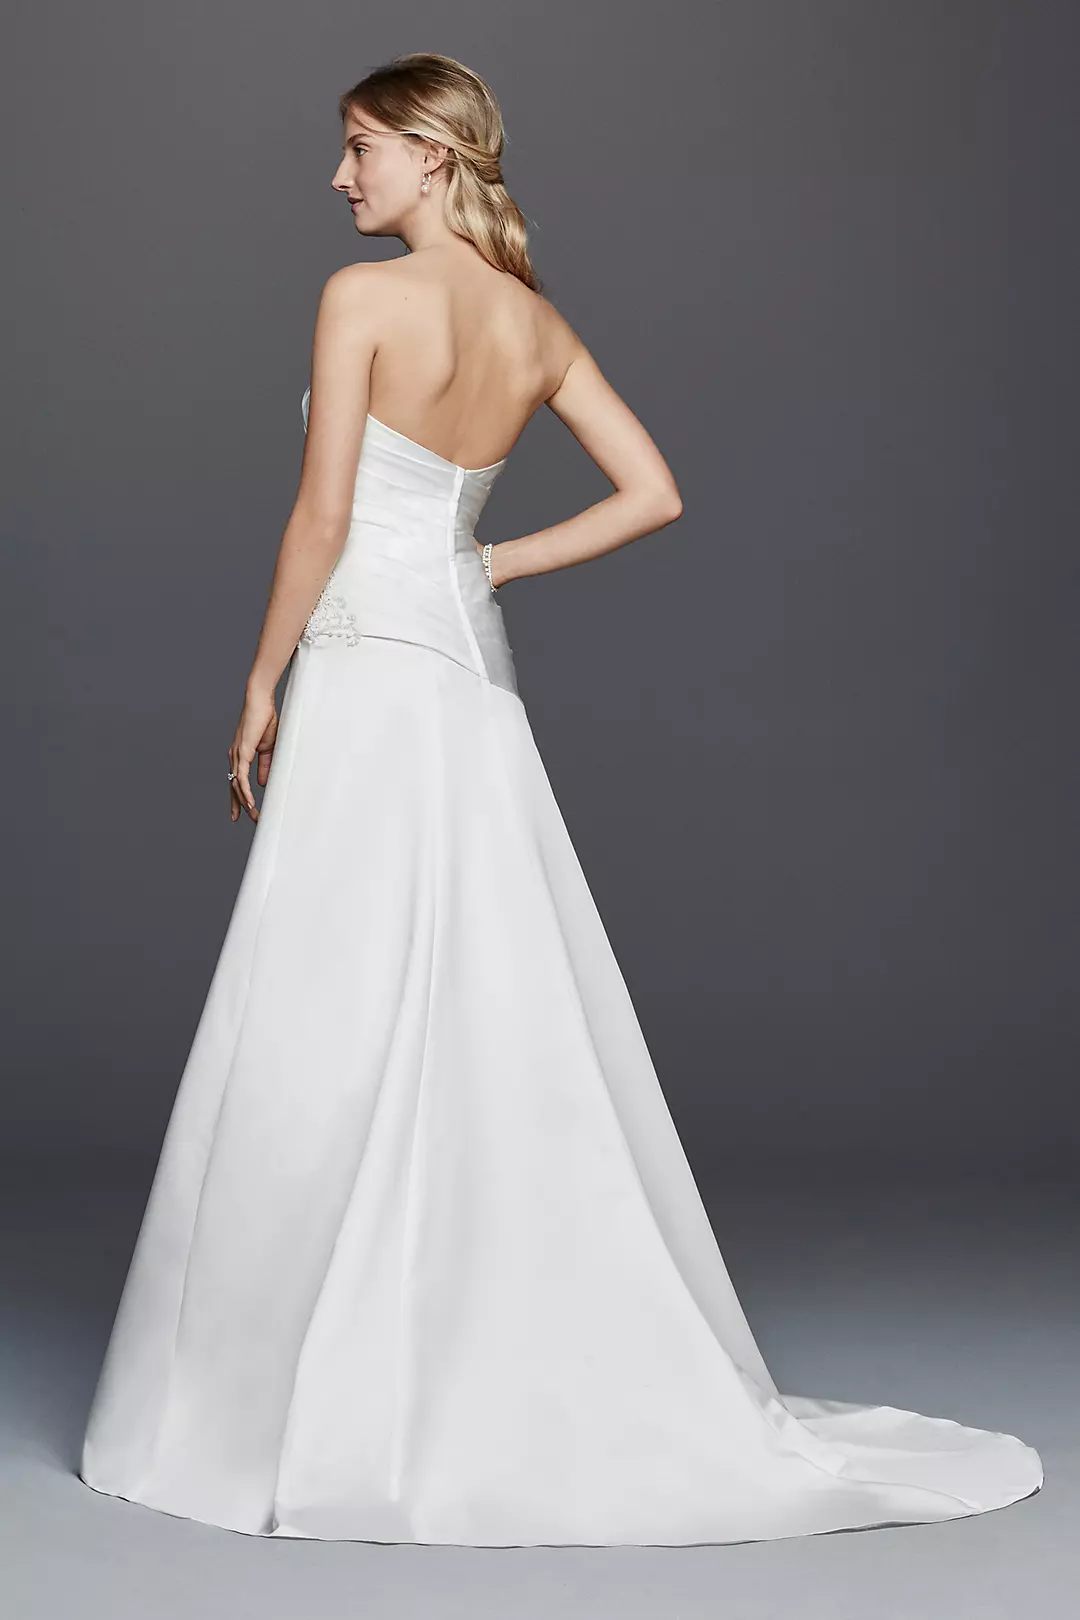 Strapless Ruched Wedding Dress with Lace | David's Bridal